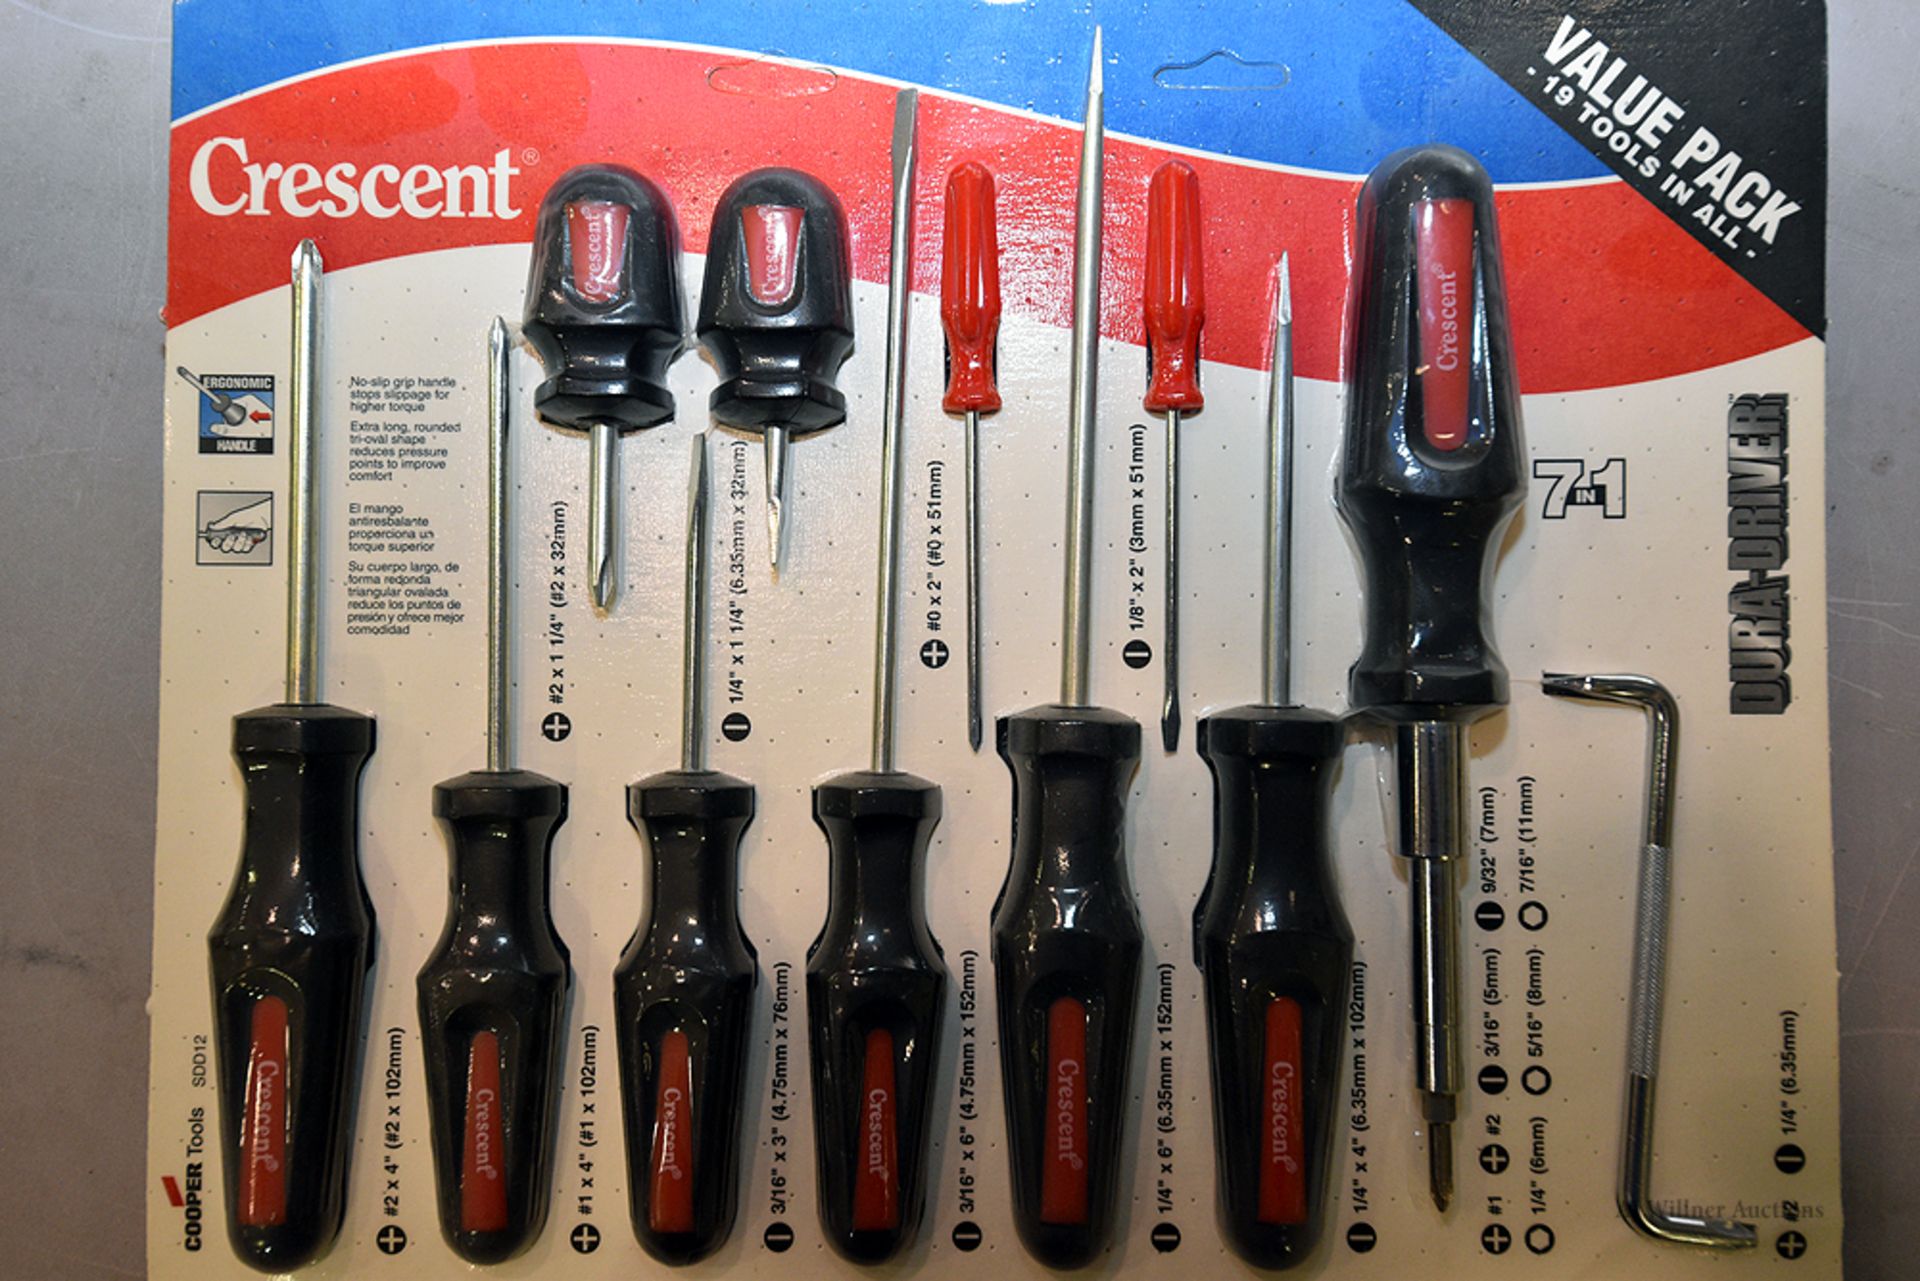 Cresent, Value Pack, "19 Tools in All" Driver Kit